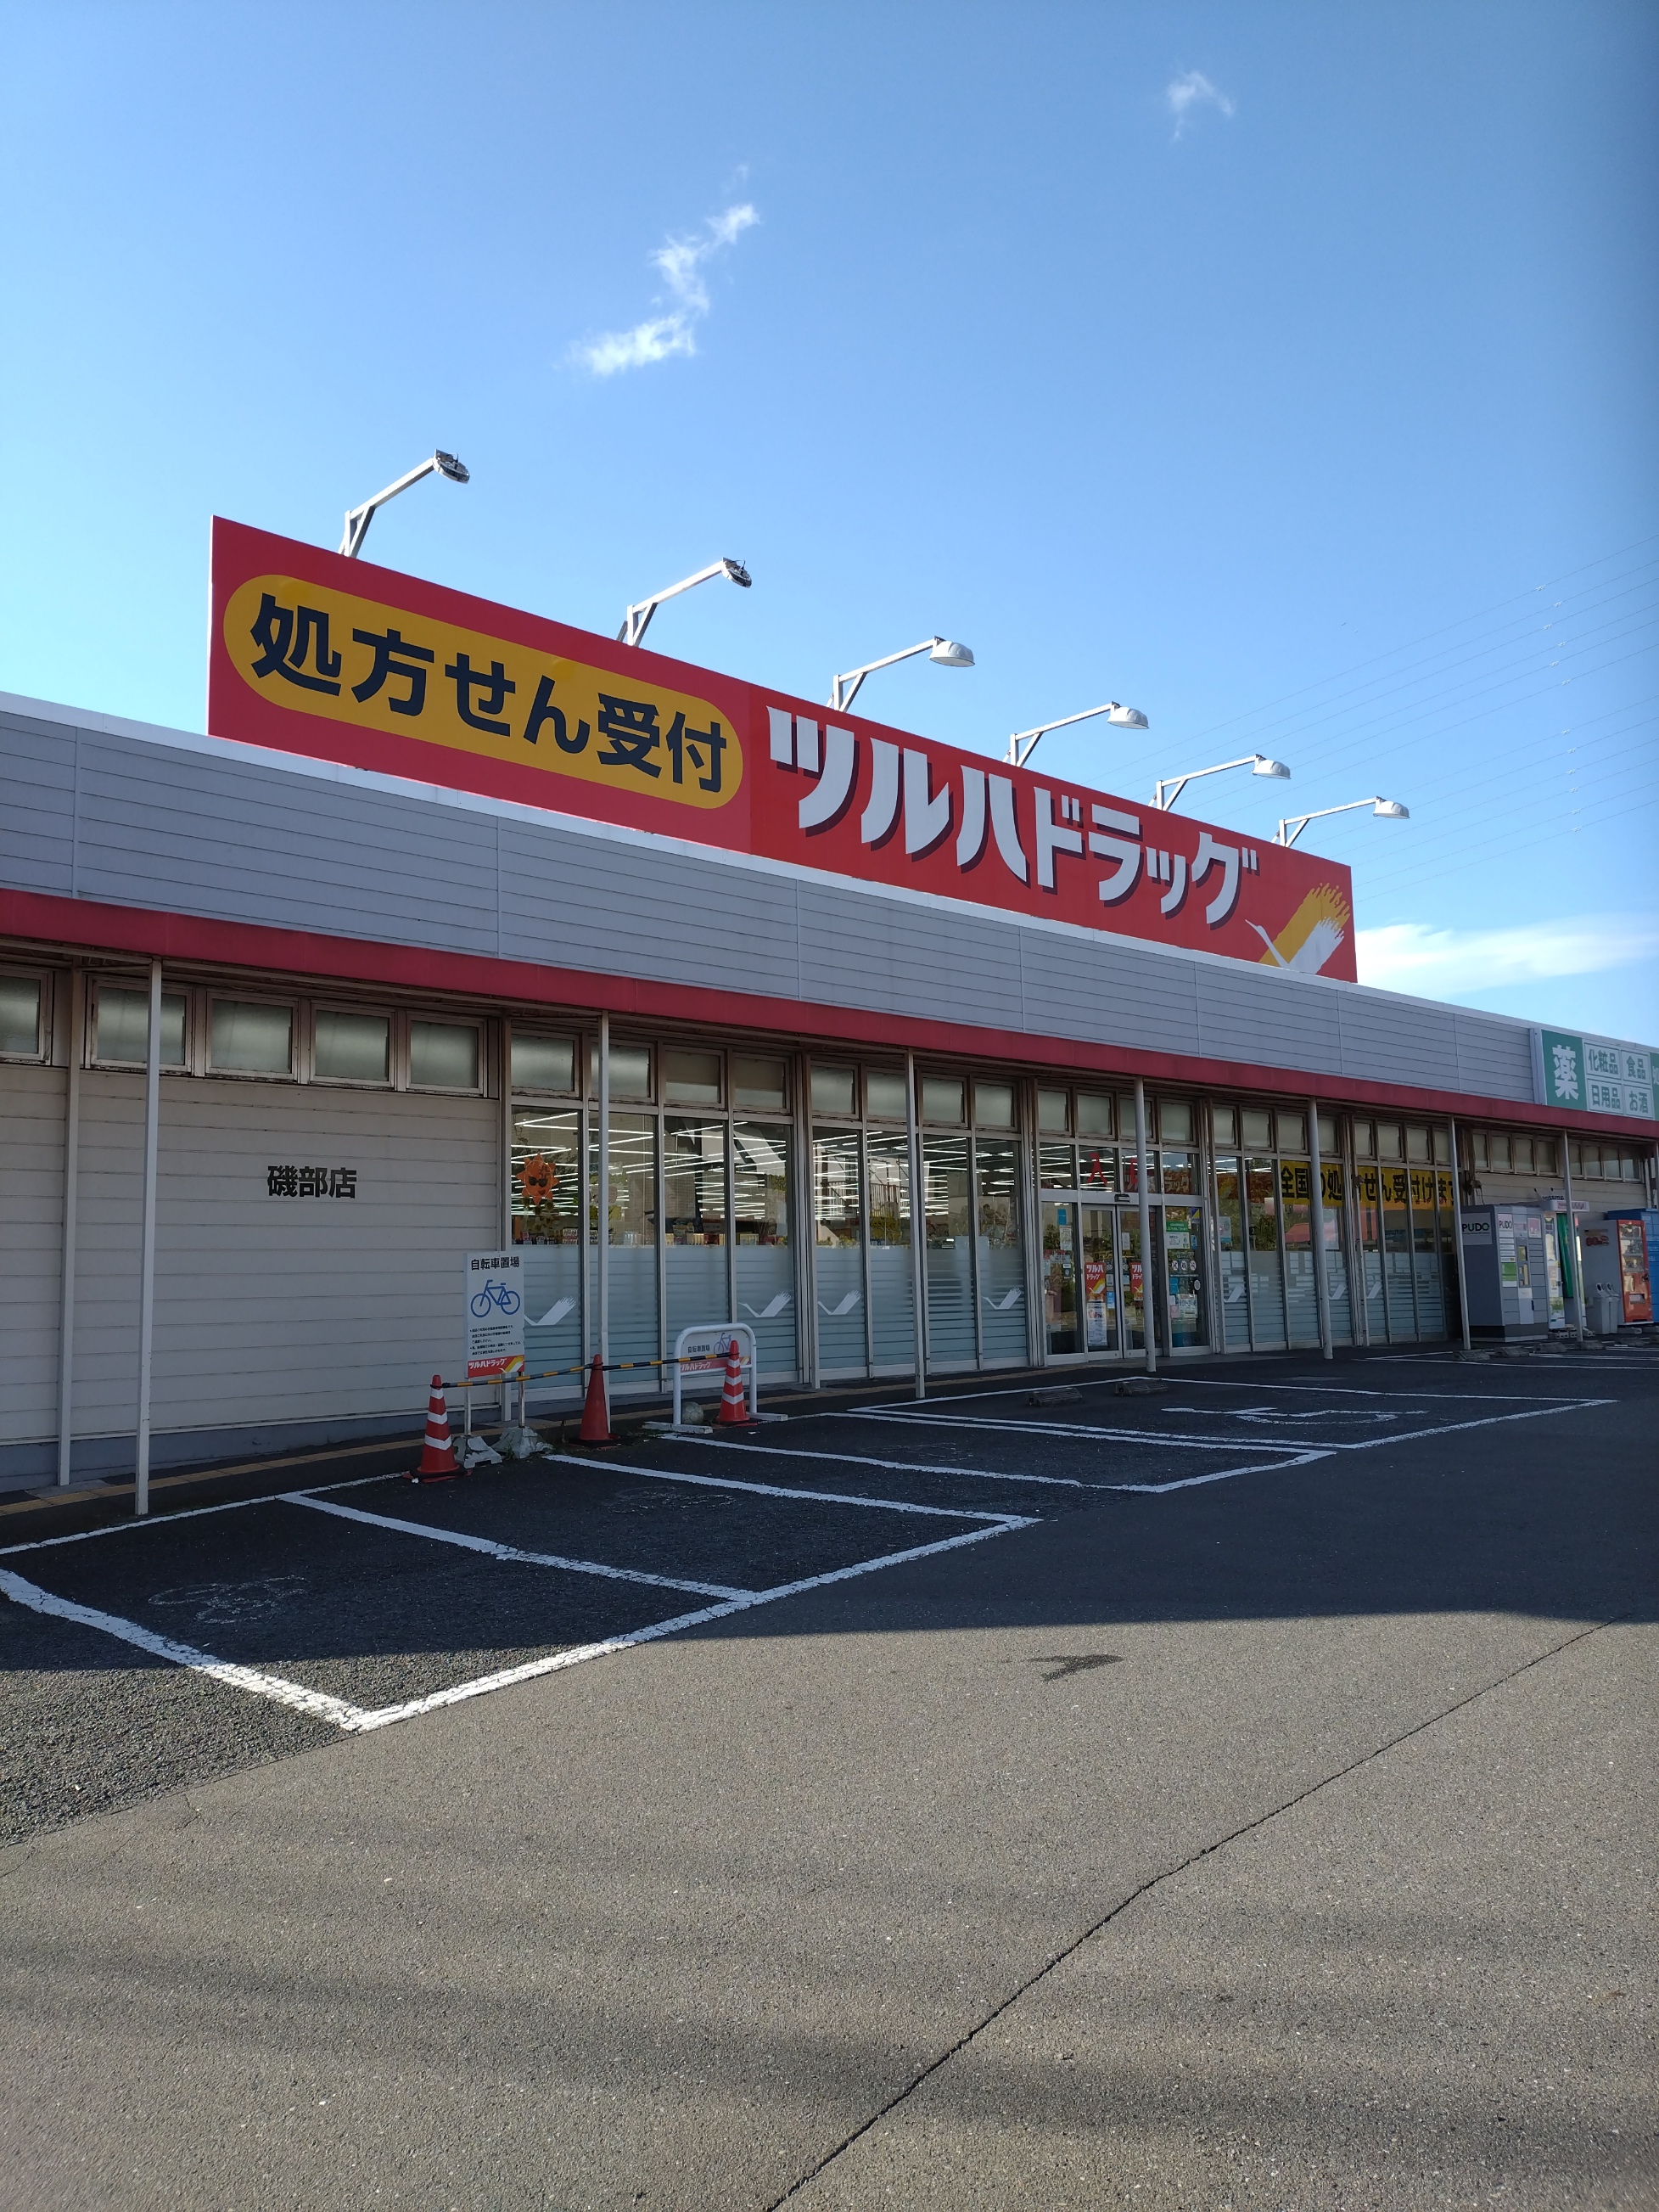 Images ツルハドラッグ 磯部店